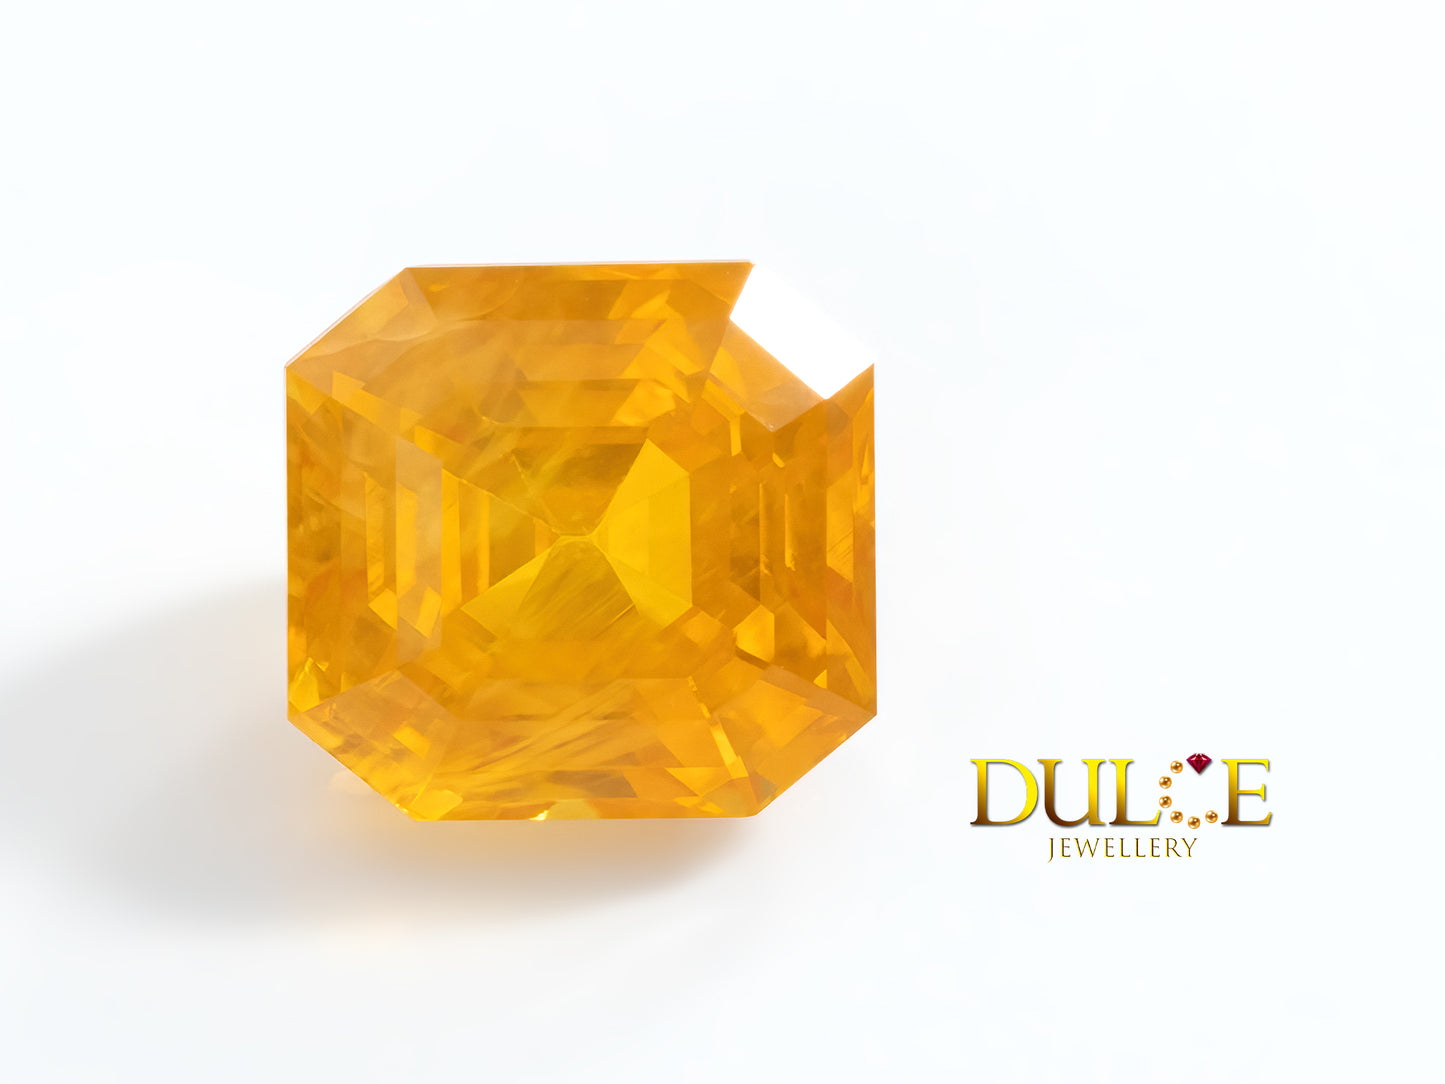 Yellow Sapphire (Price by request)